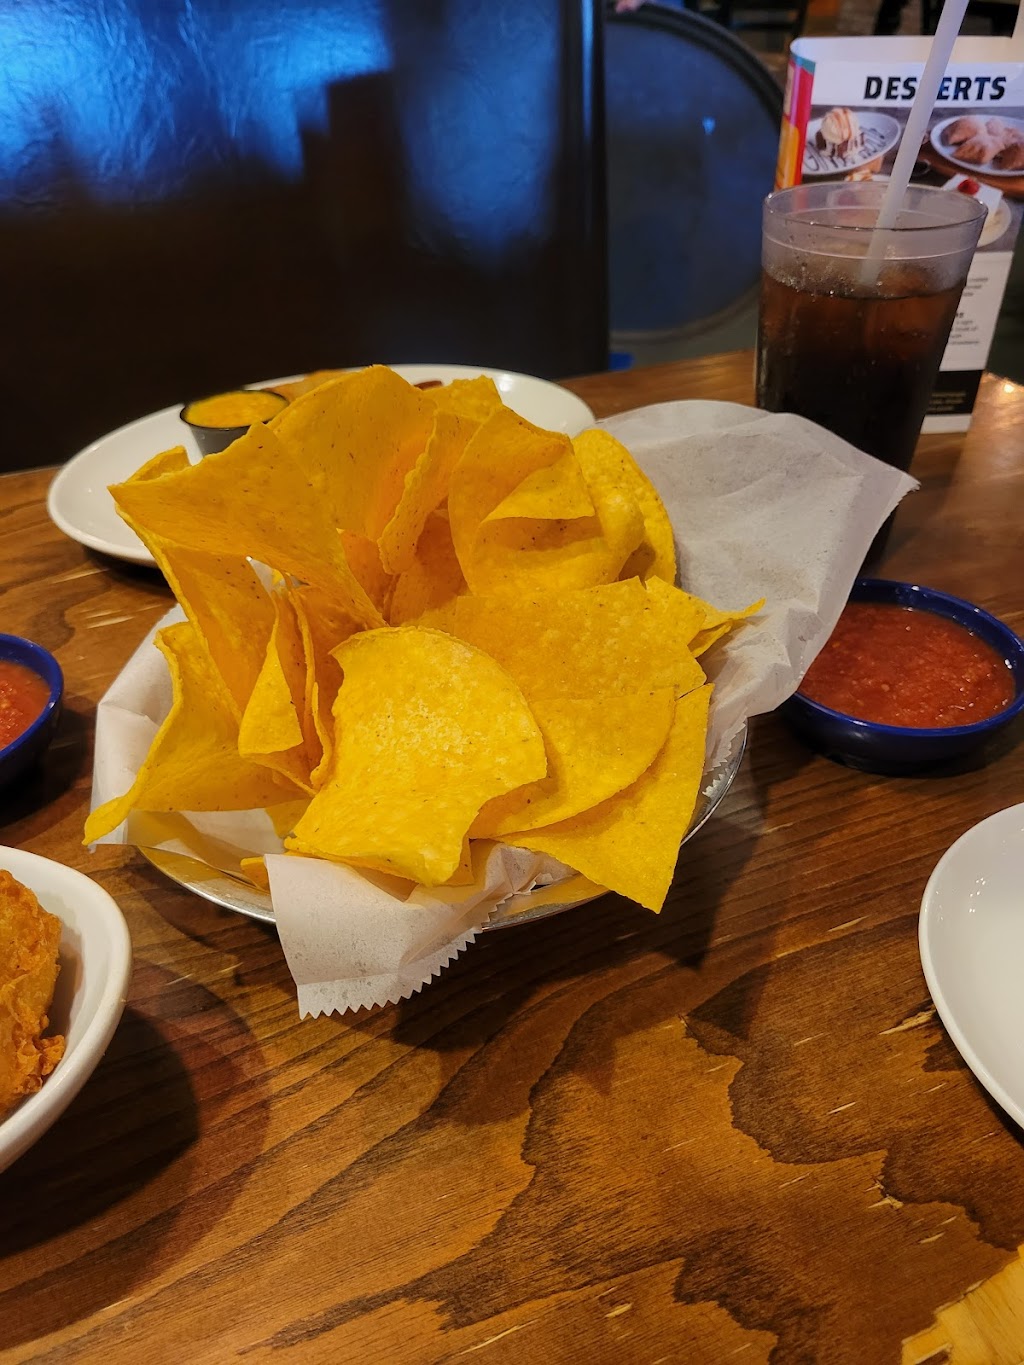 On The Border Mexican Grill & Cantina - Rocky Hill | 1519 Silas Deane Hwy, Rocky Hill, CT 06067 | Phone: (860) 899-1670